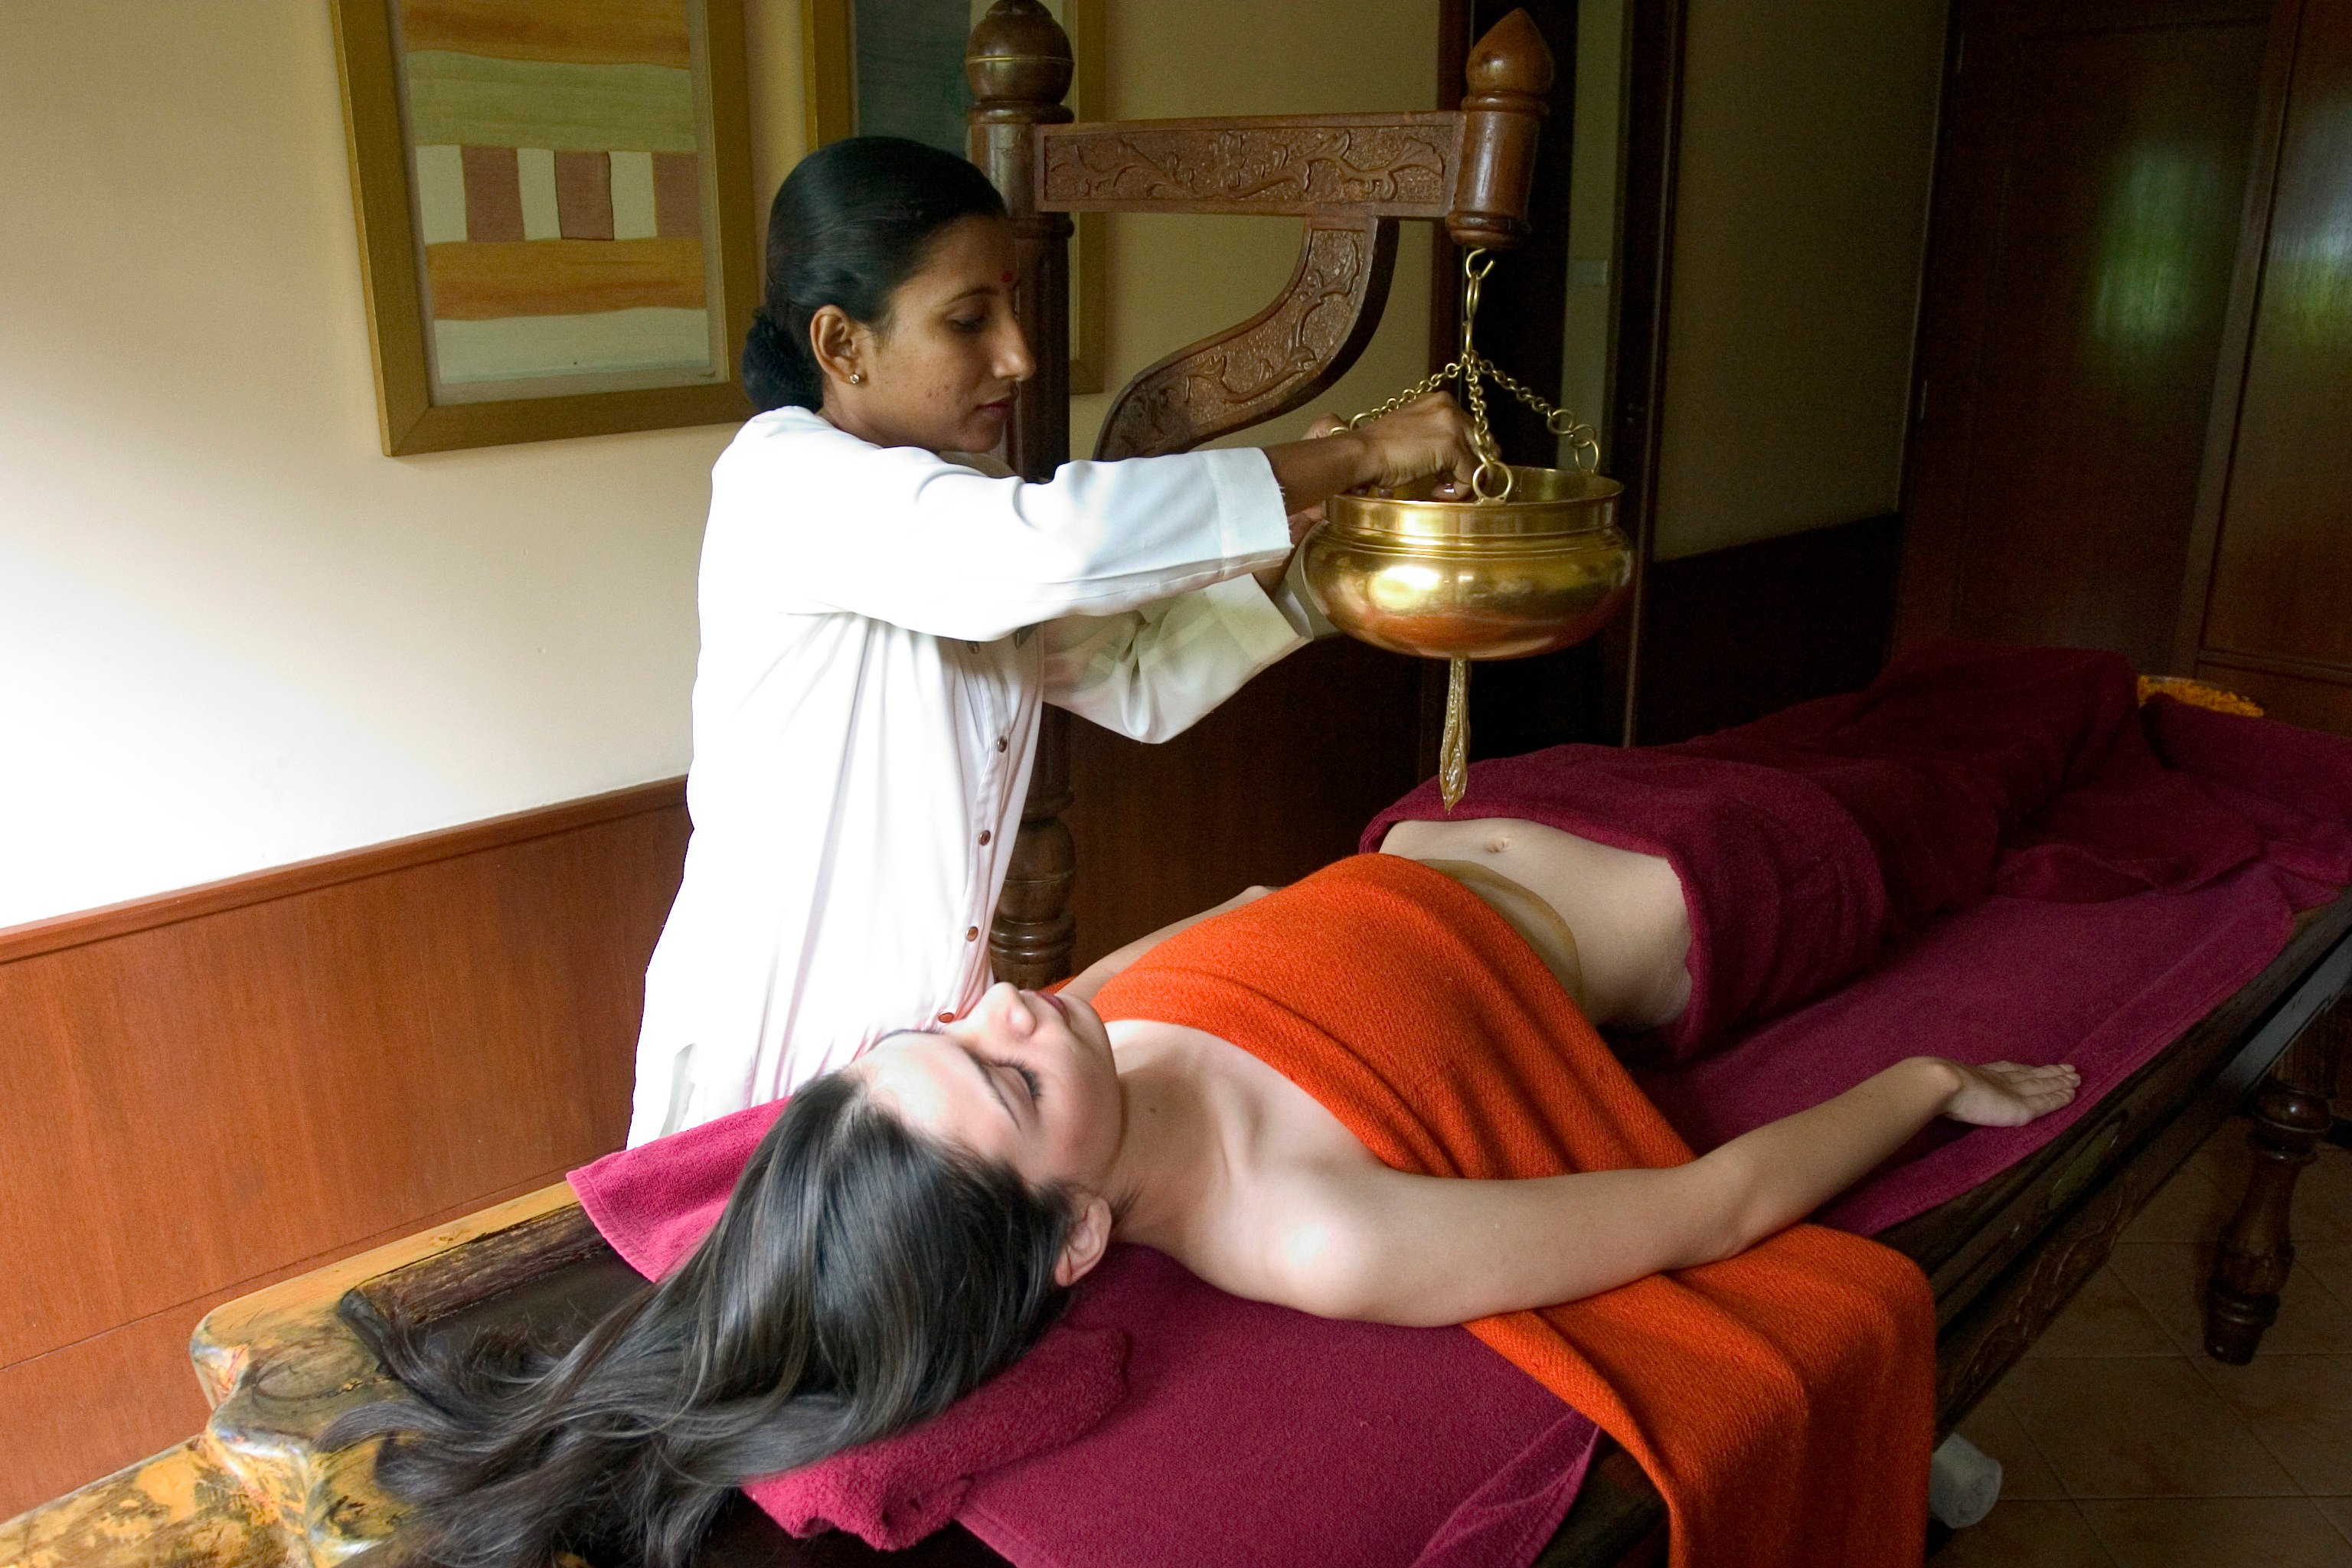 In the Himalayas, luxury spa resort Ananda’s menopause retreat uses Ayurvedic practices and traditional Chinese medicine (TCM) to correct imbalances and tackle hormonal fluctuations. It is one of a number of retreats for women - including those at perimenopause and post-menopausal stages - that aim to help alleviate their symptoms. Photo: Ananda